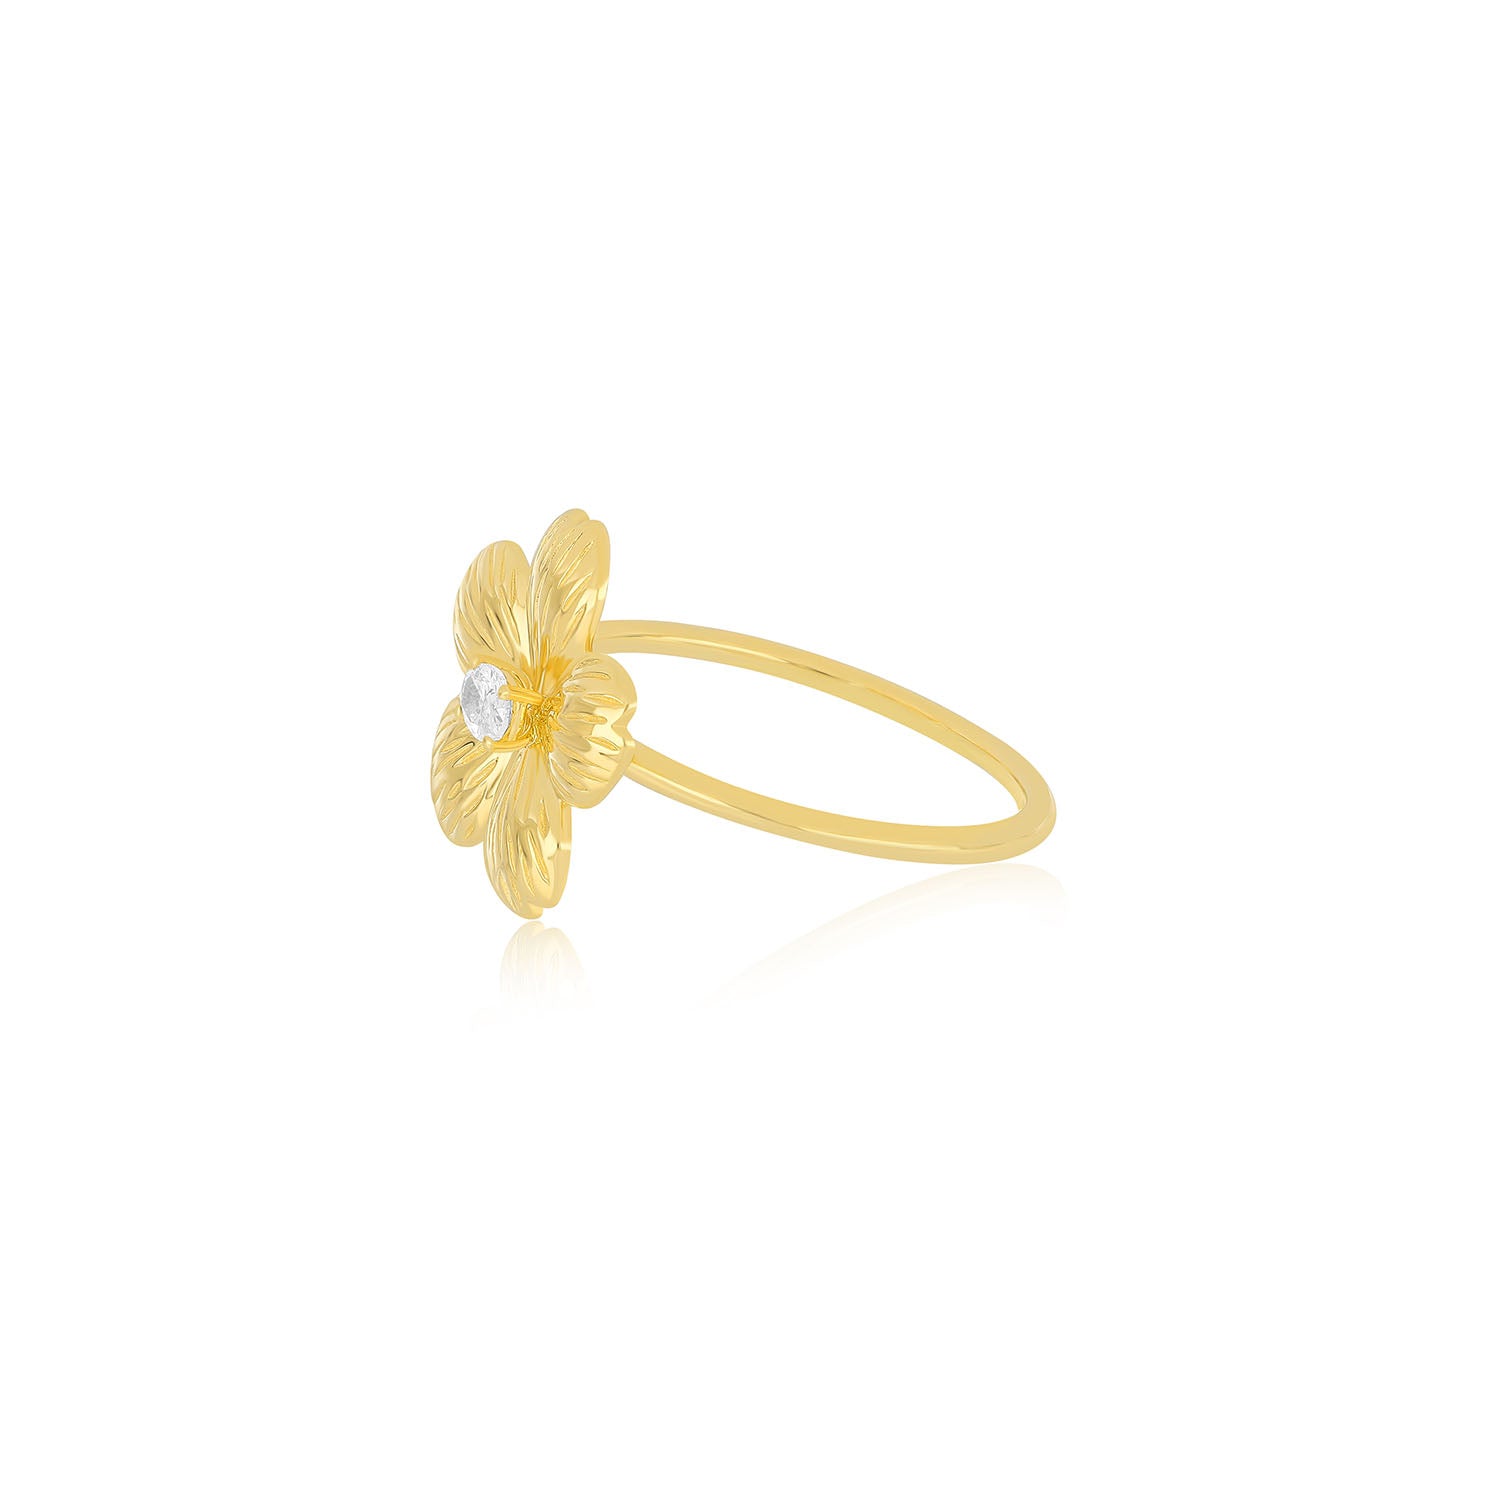 Cherry Blossom Ring in 14k yellow gold side view